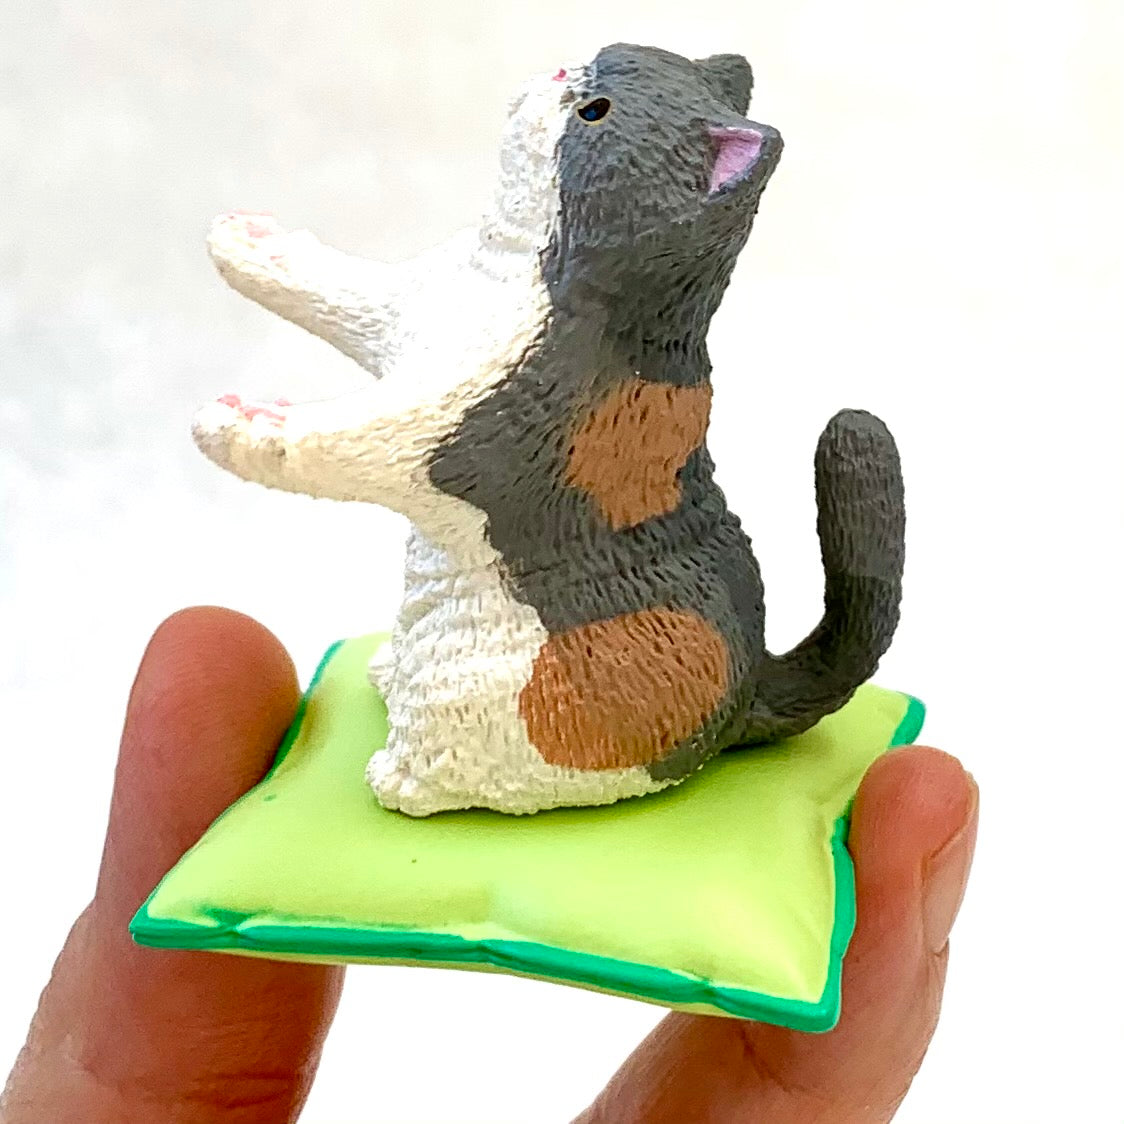 X 70907 Cat on Pillow Pen Holder Capsule-DISCONTINUED